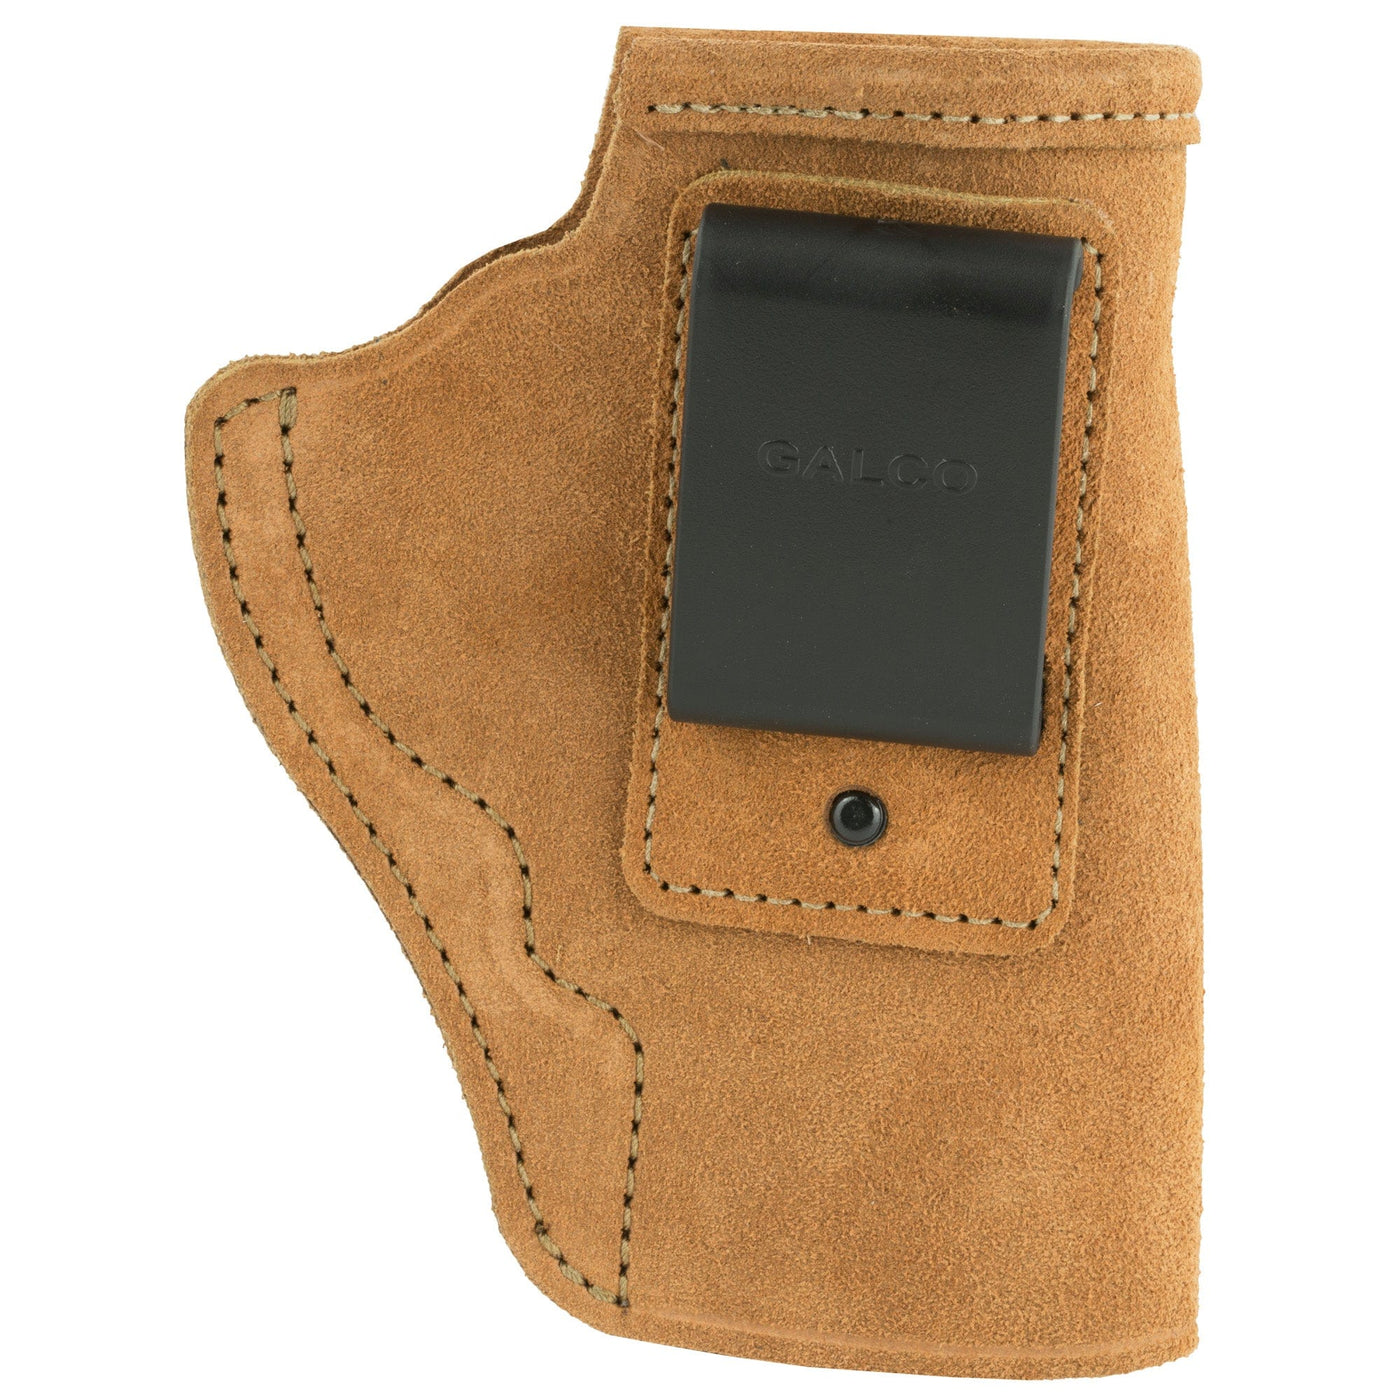 Galco Galco Stow-n-go J Fr Rh Nat Holsters